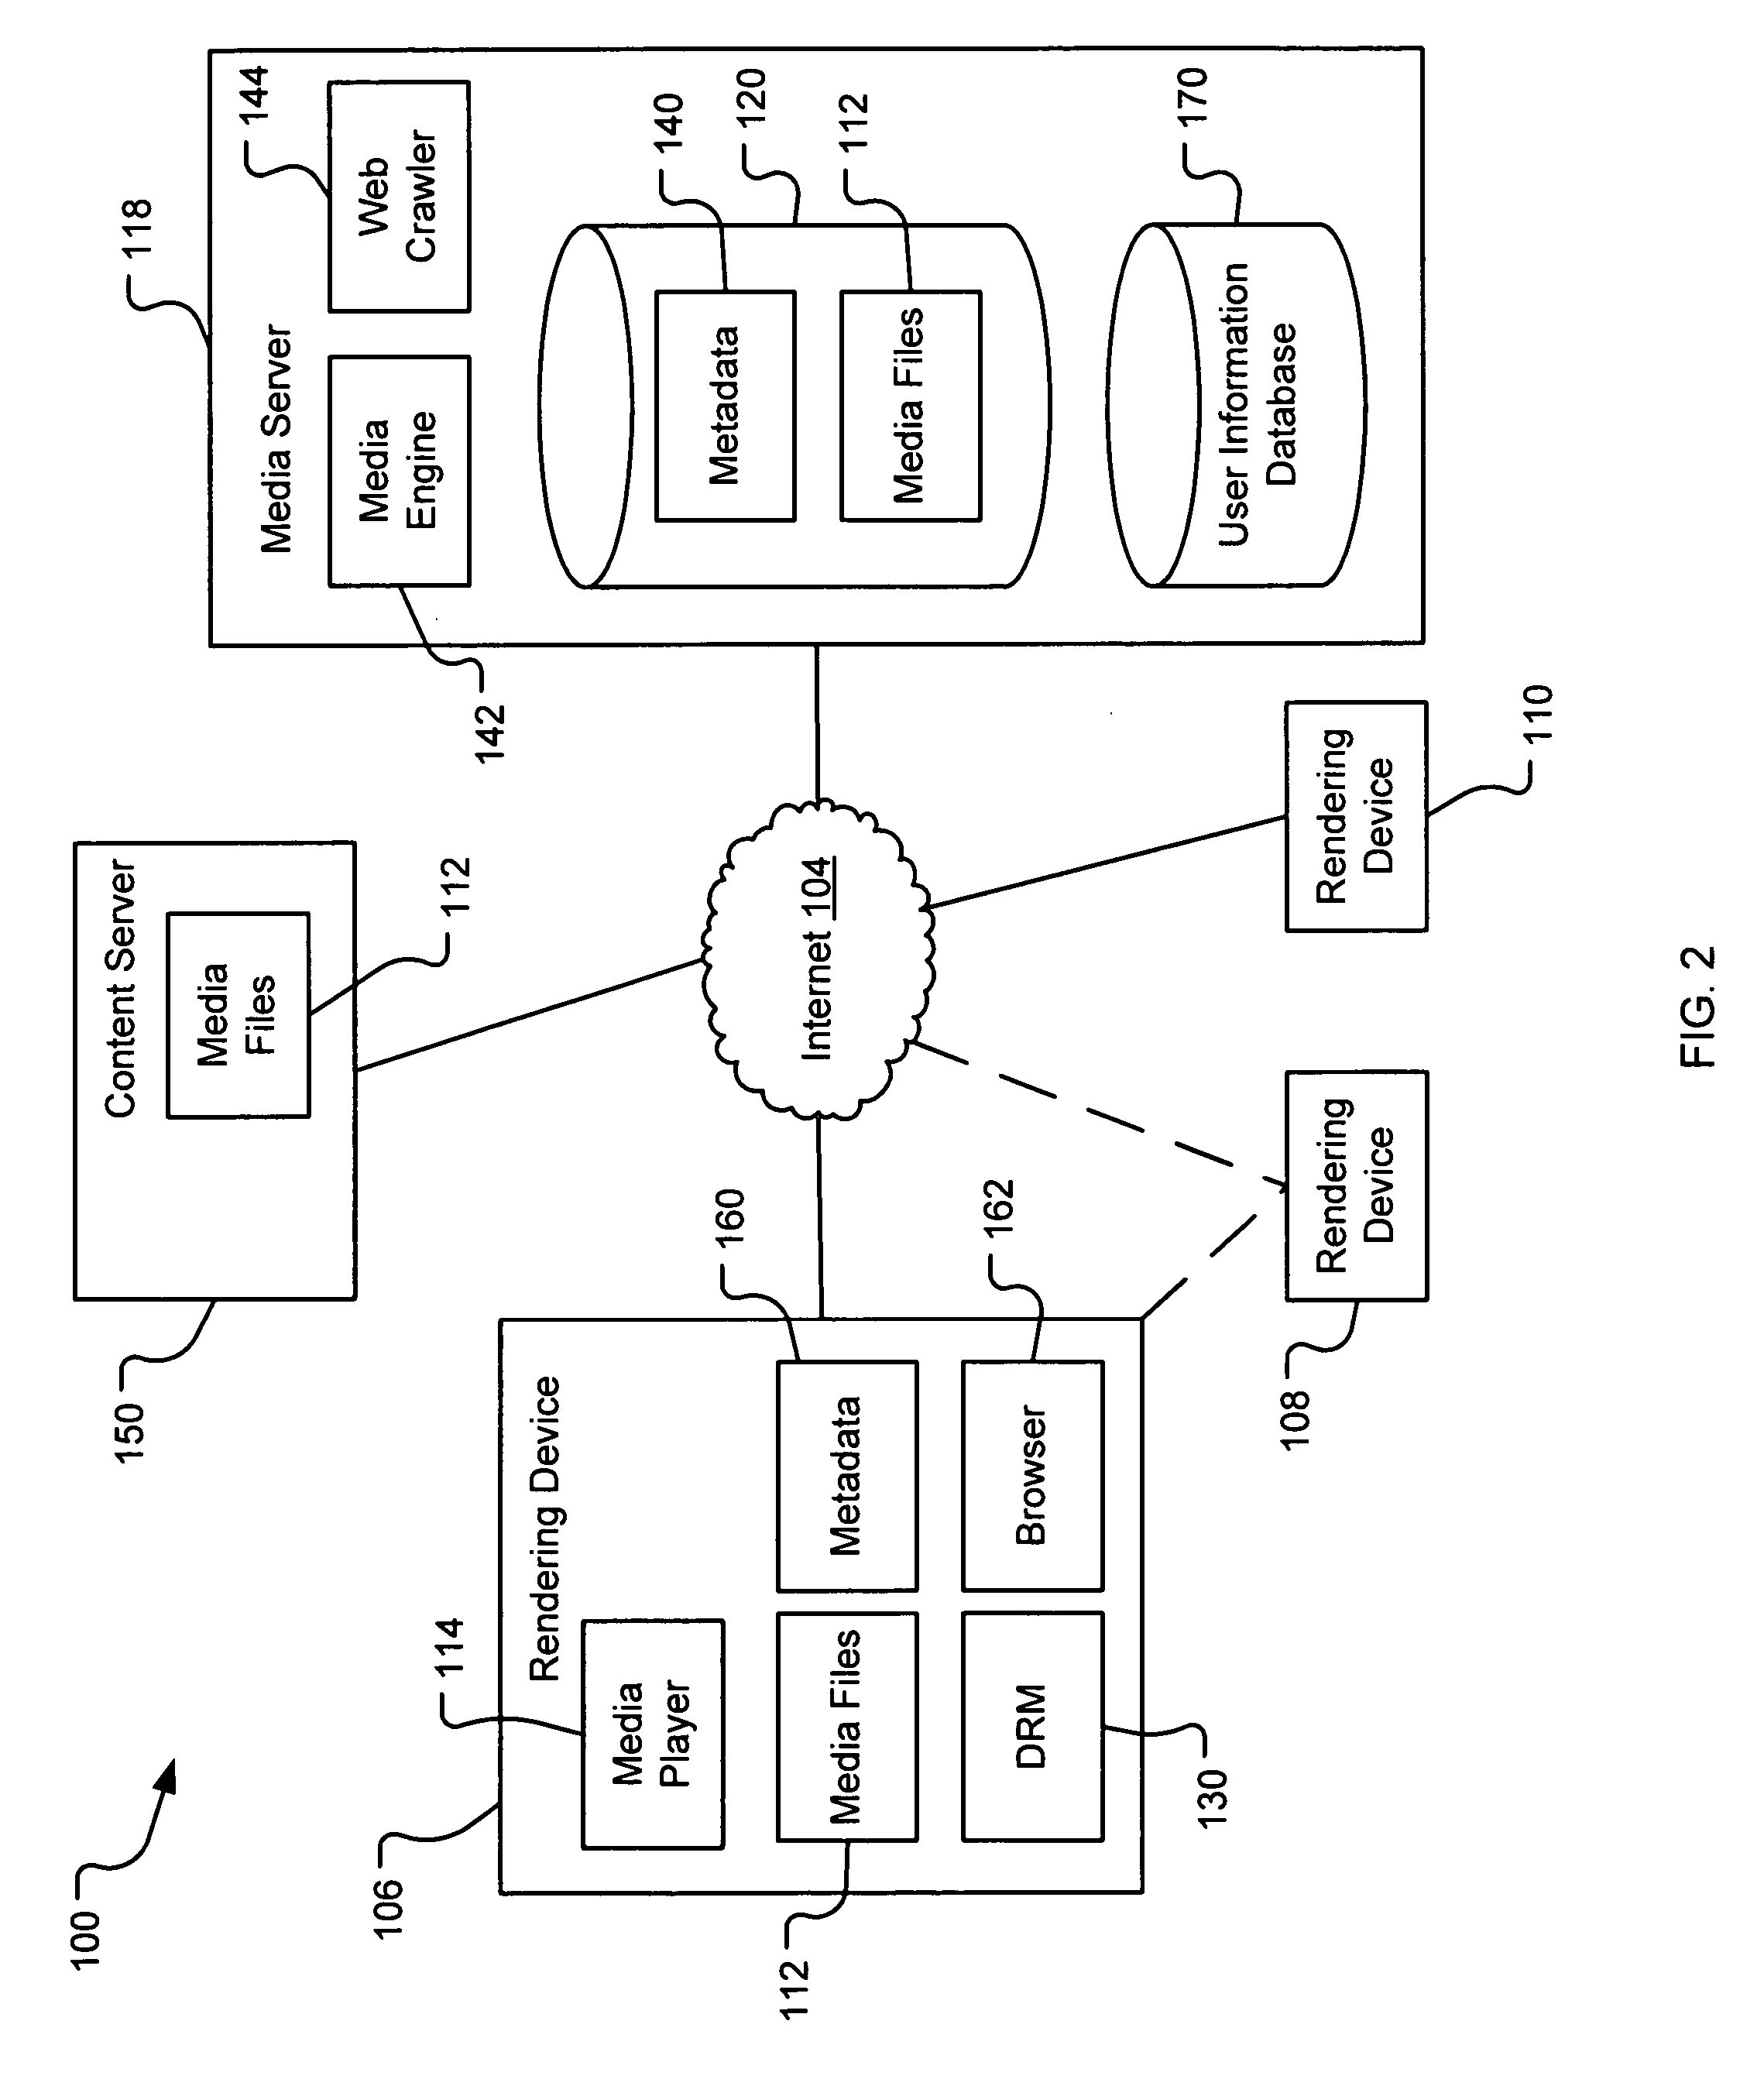 Generating a stream of media data containing portions of media files using location tags